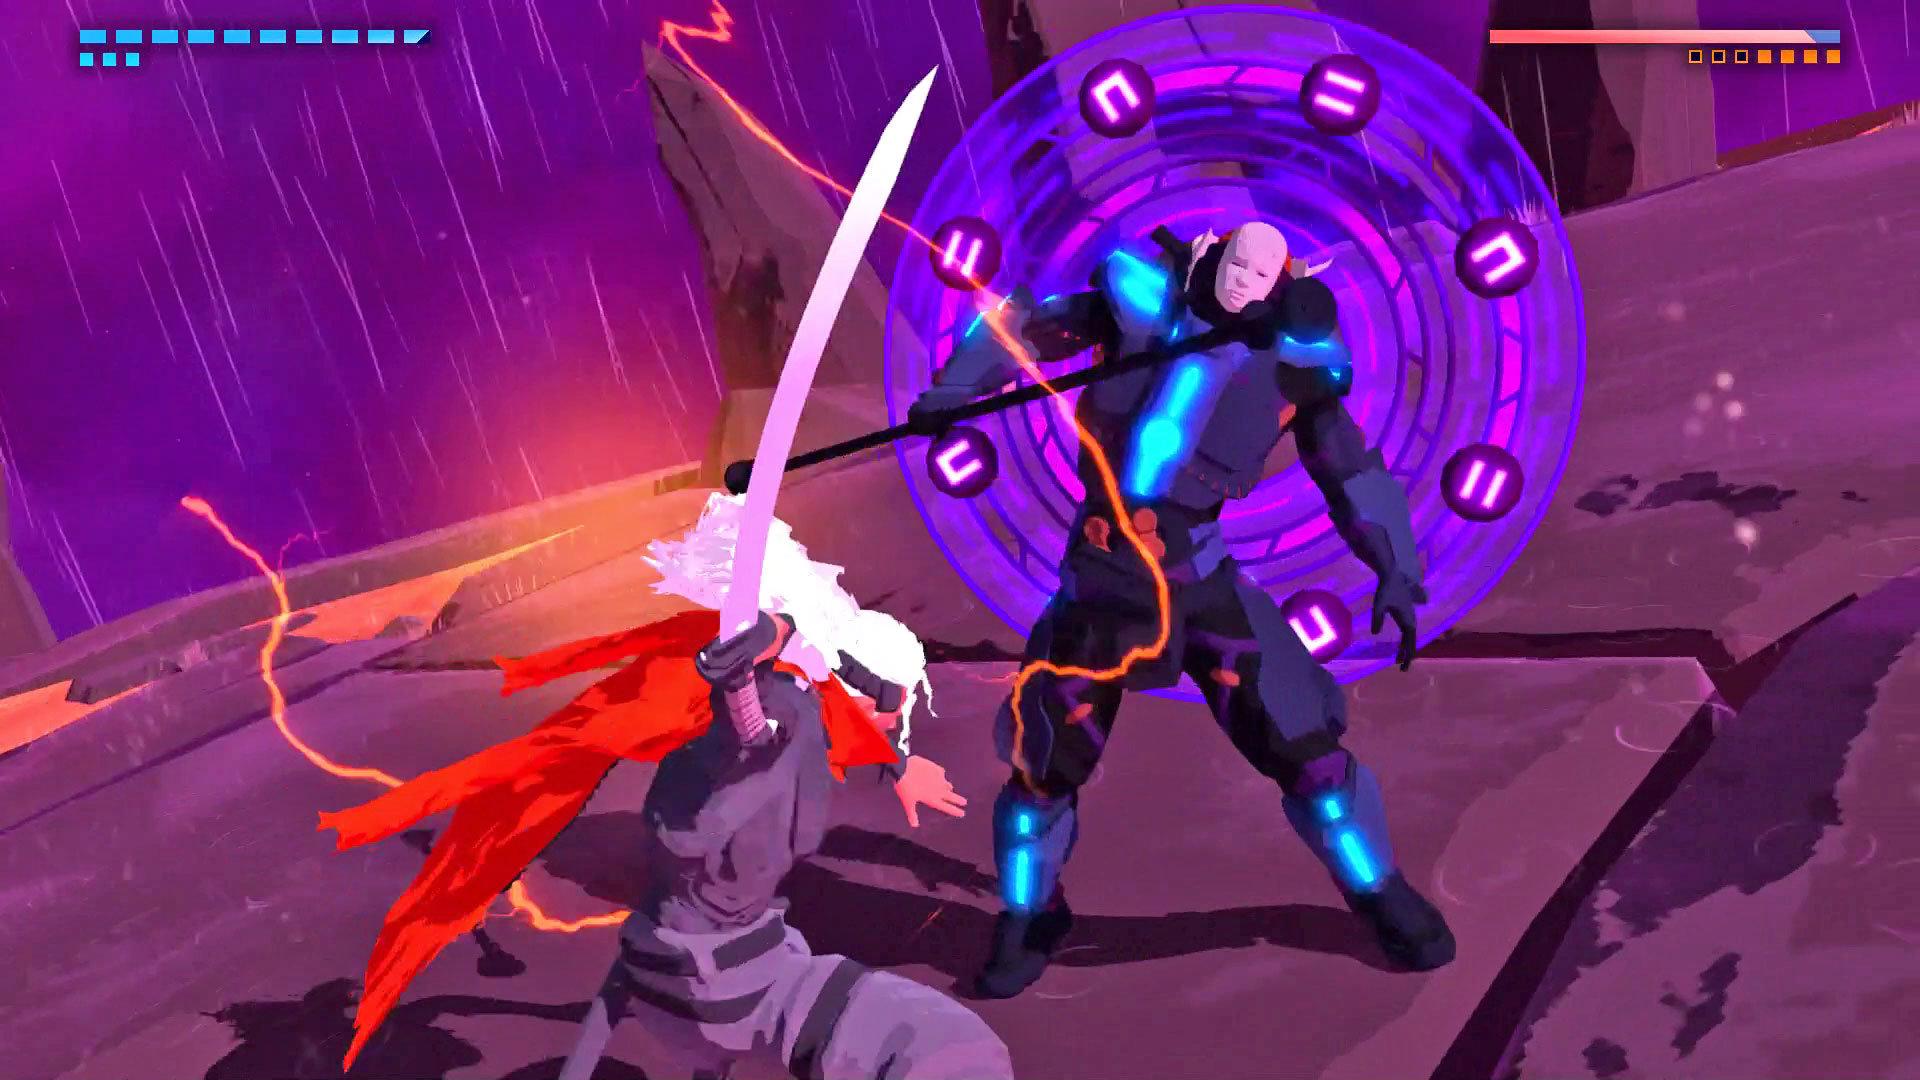 Furi' unleashes nothing but boss battles on PS4 and Steam this